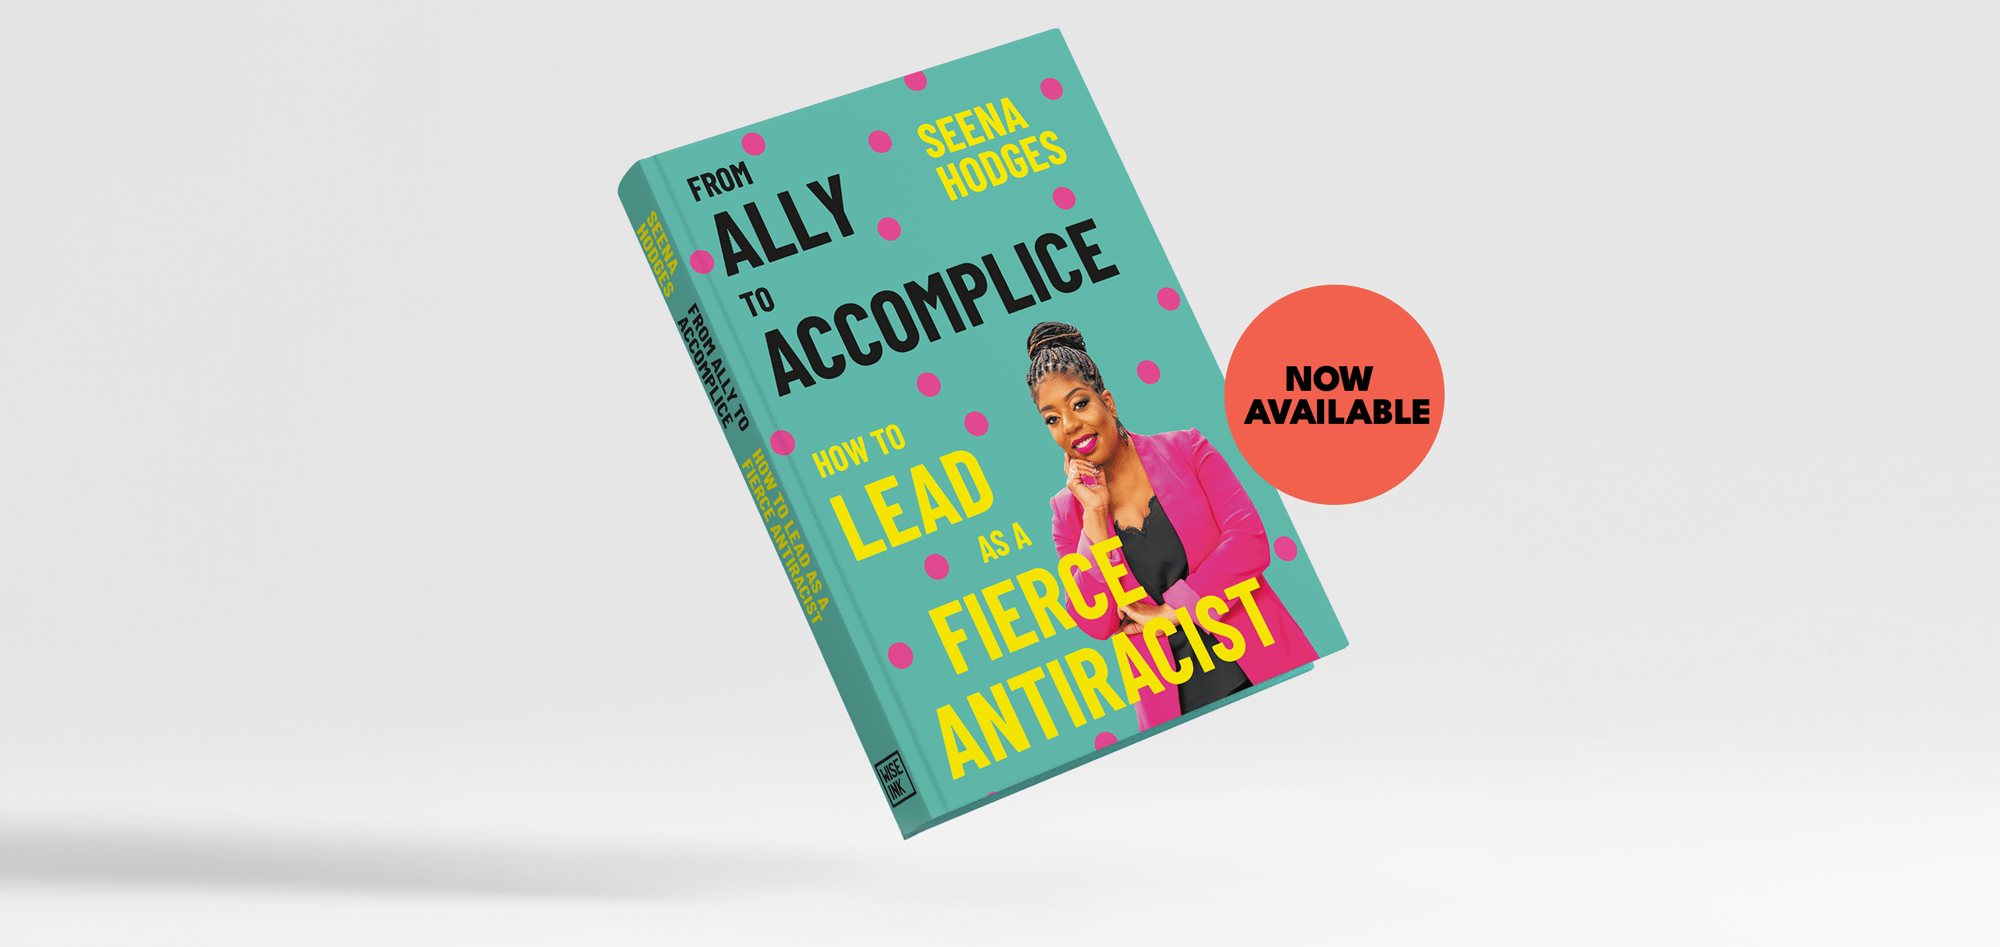 From-ally-to-accomplice-book-available-now